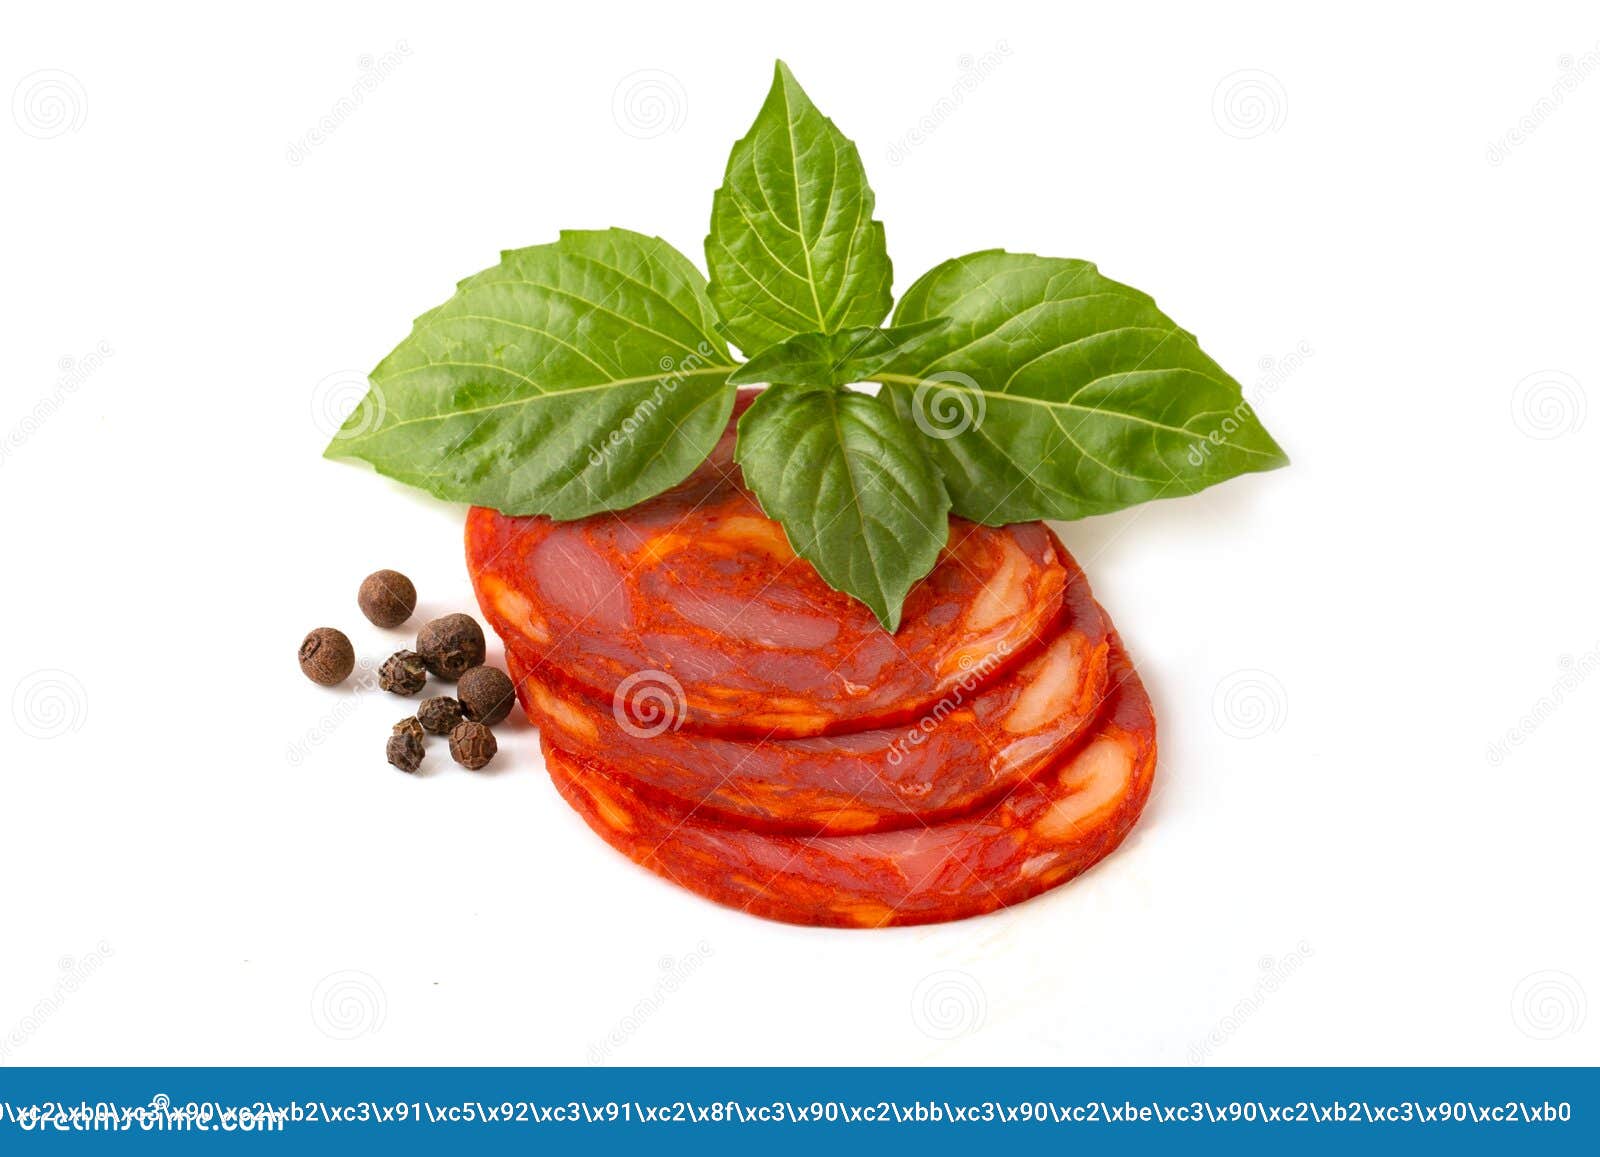 sliced round pieces of raw-cured chorizo sausage with basil leaf and pepper peas on a white background